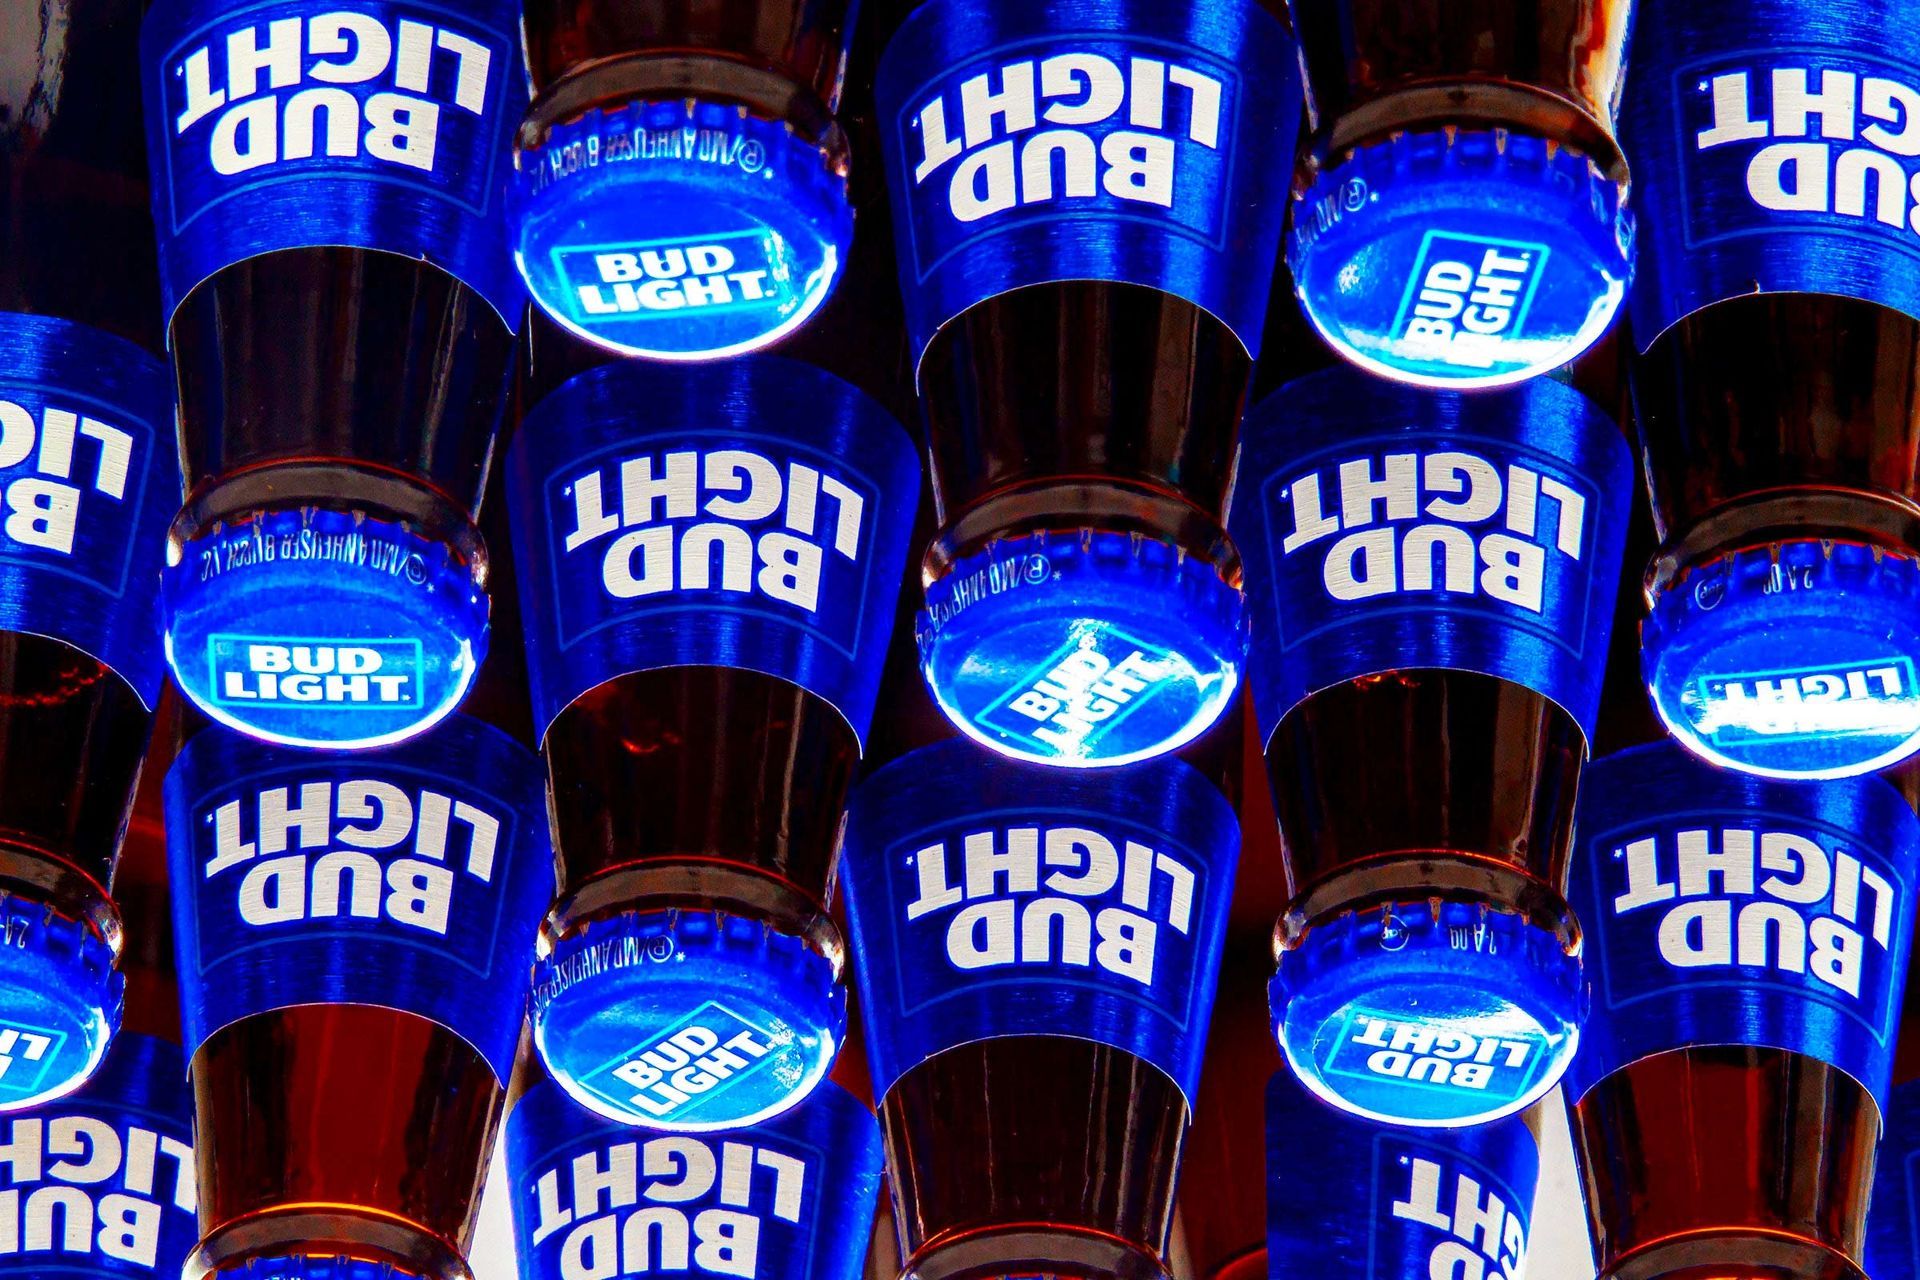 Bud Light’s sales drop is accelerating amid Dylan Mulvaney fiasco — and is now spilling into other Bud brands